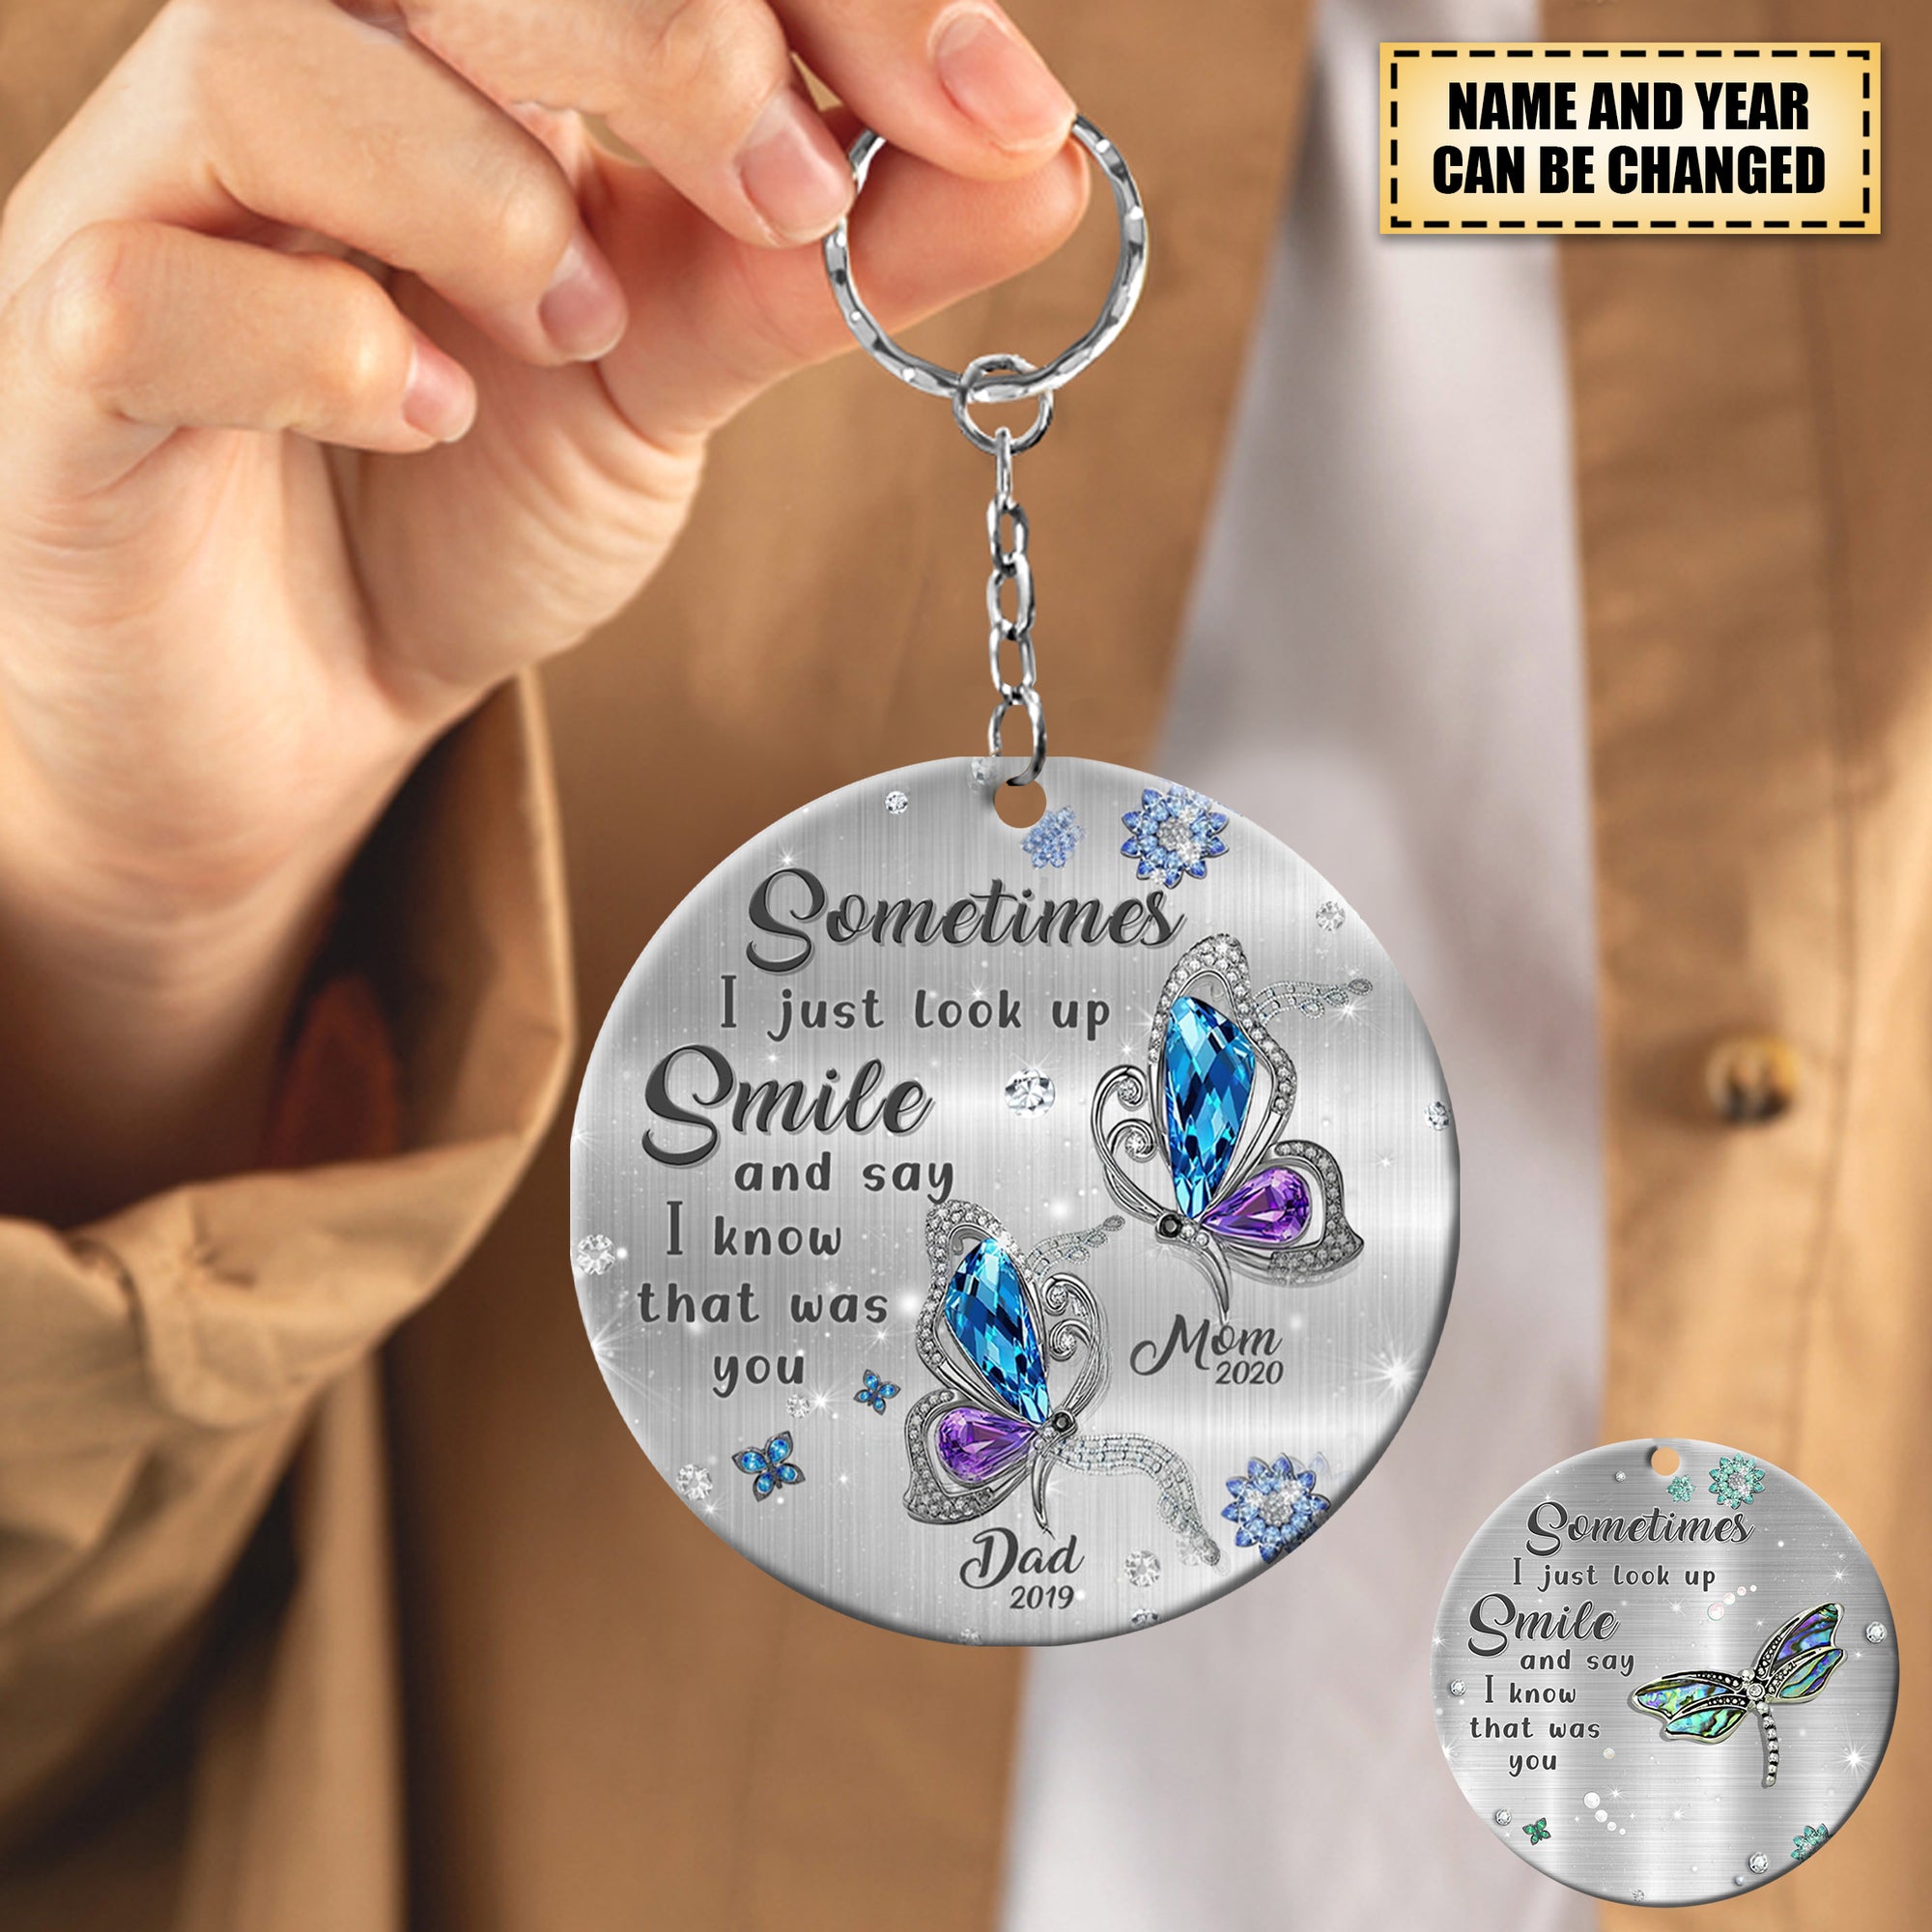 Sometimes I just look up Smile memory Personalized Circle Acryliac Keychain